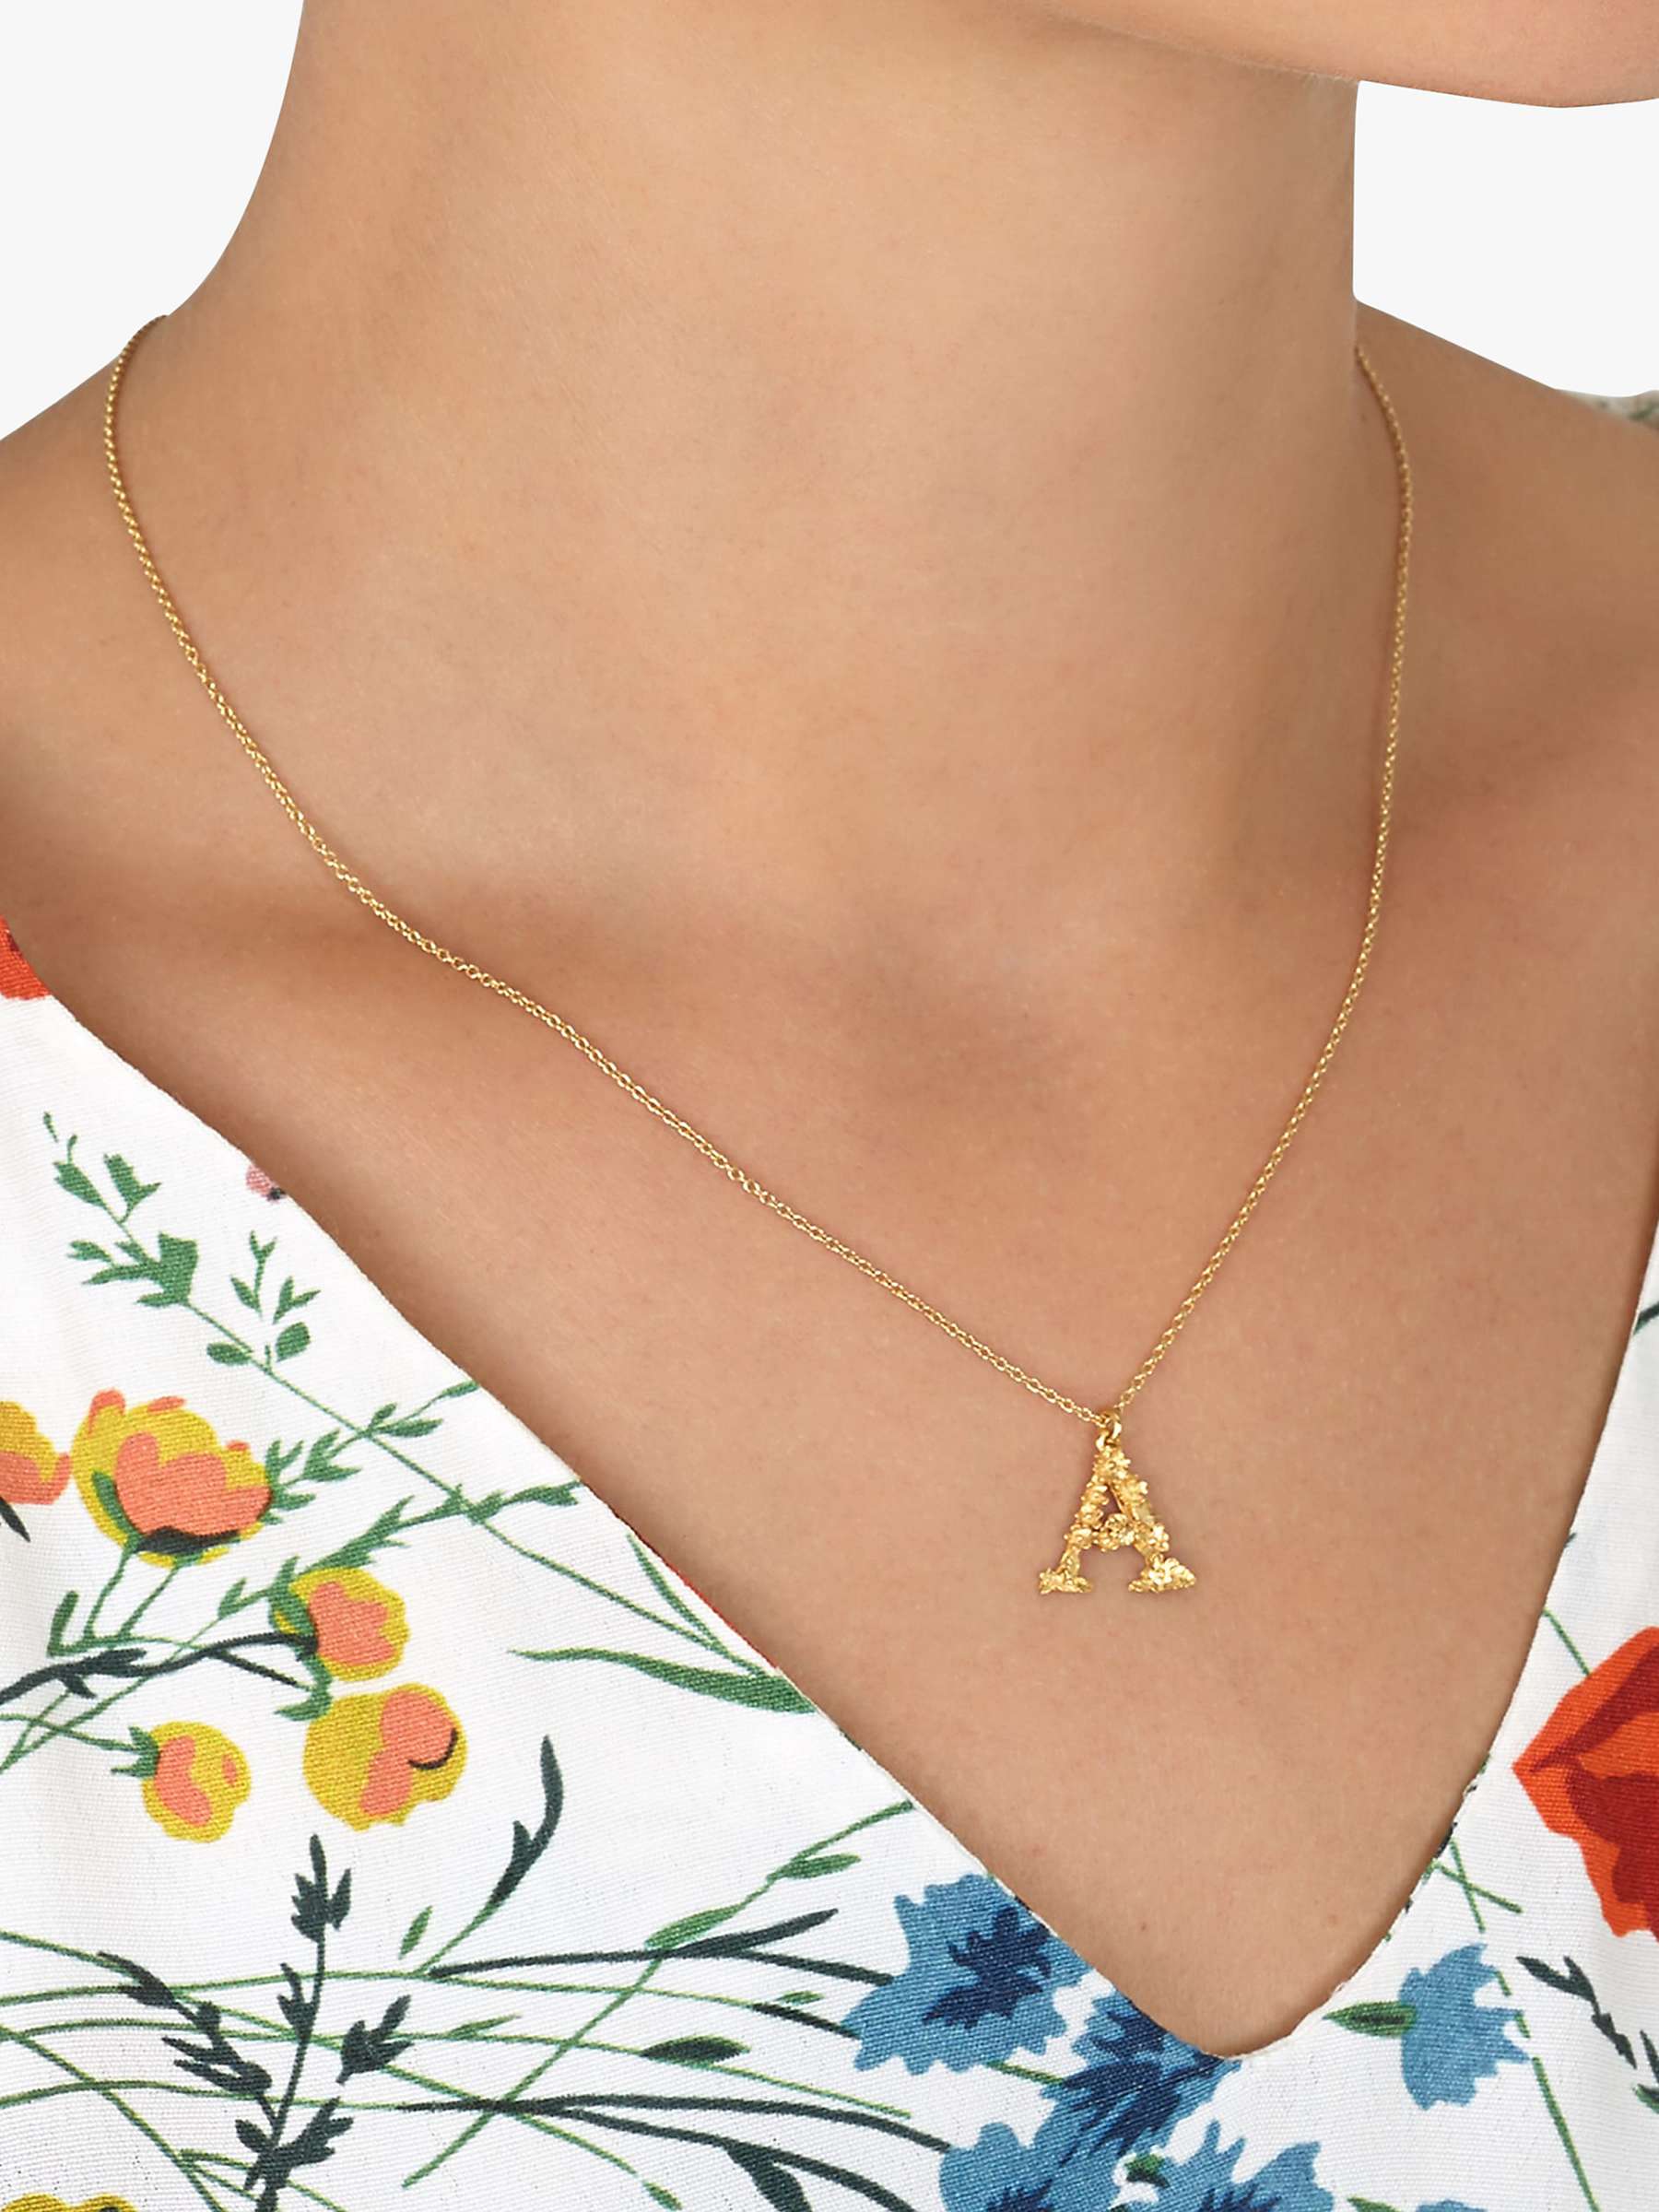 Buy Alex Monroe 22ct Gold Plated Sterling Silver Floral Initial Pendant Necklace, Gold Online at johnlewis.com